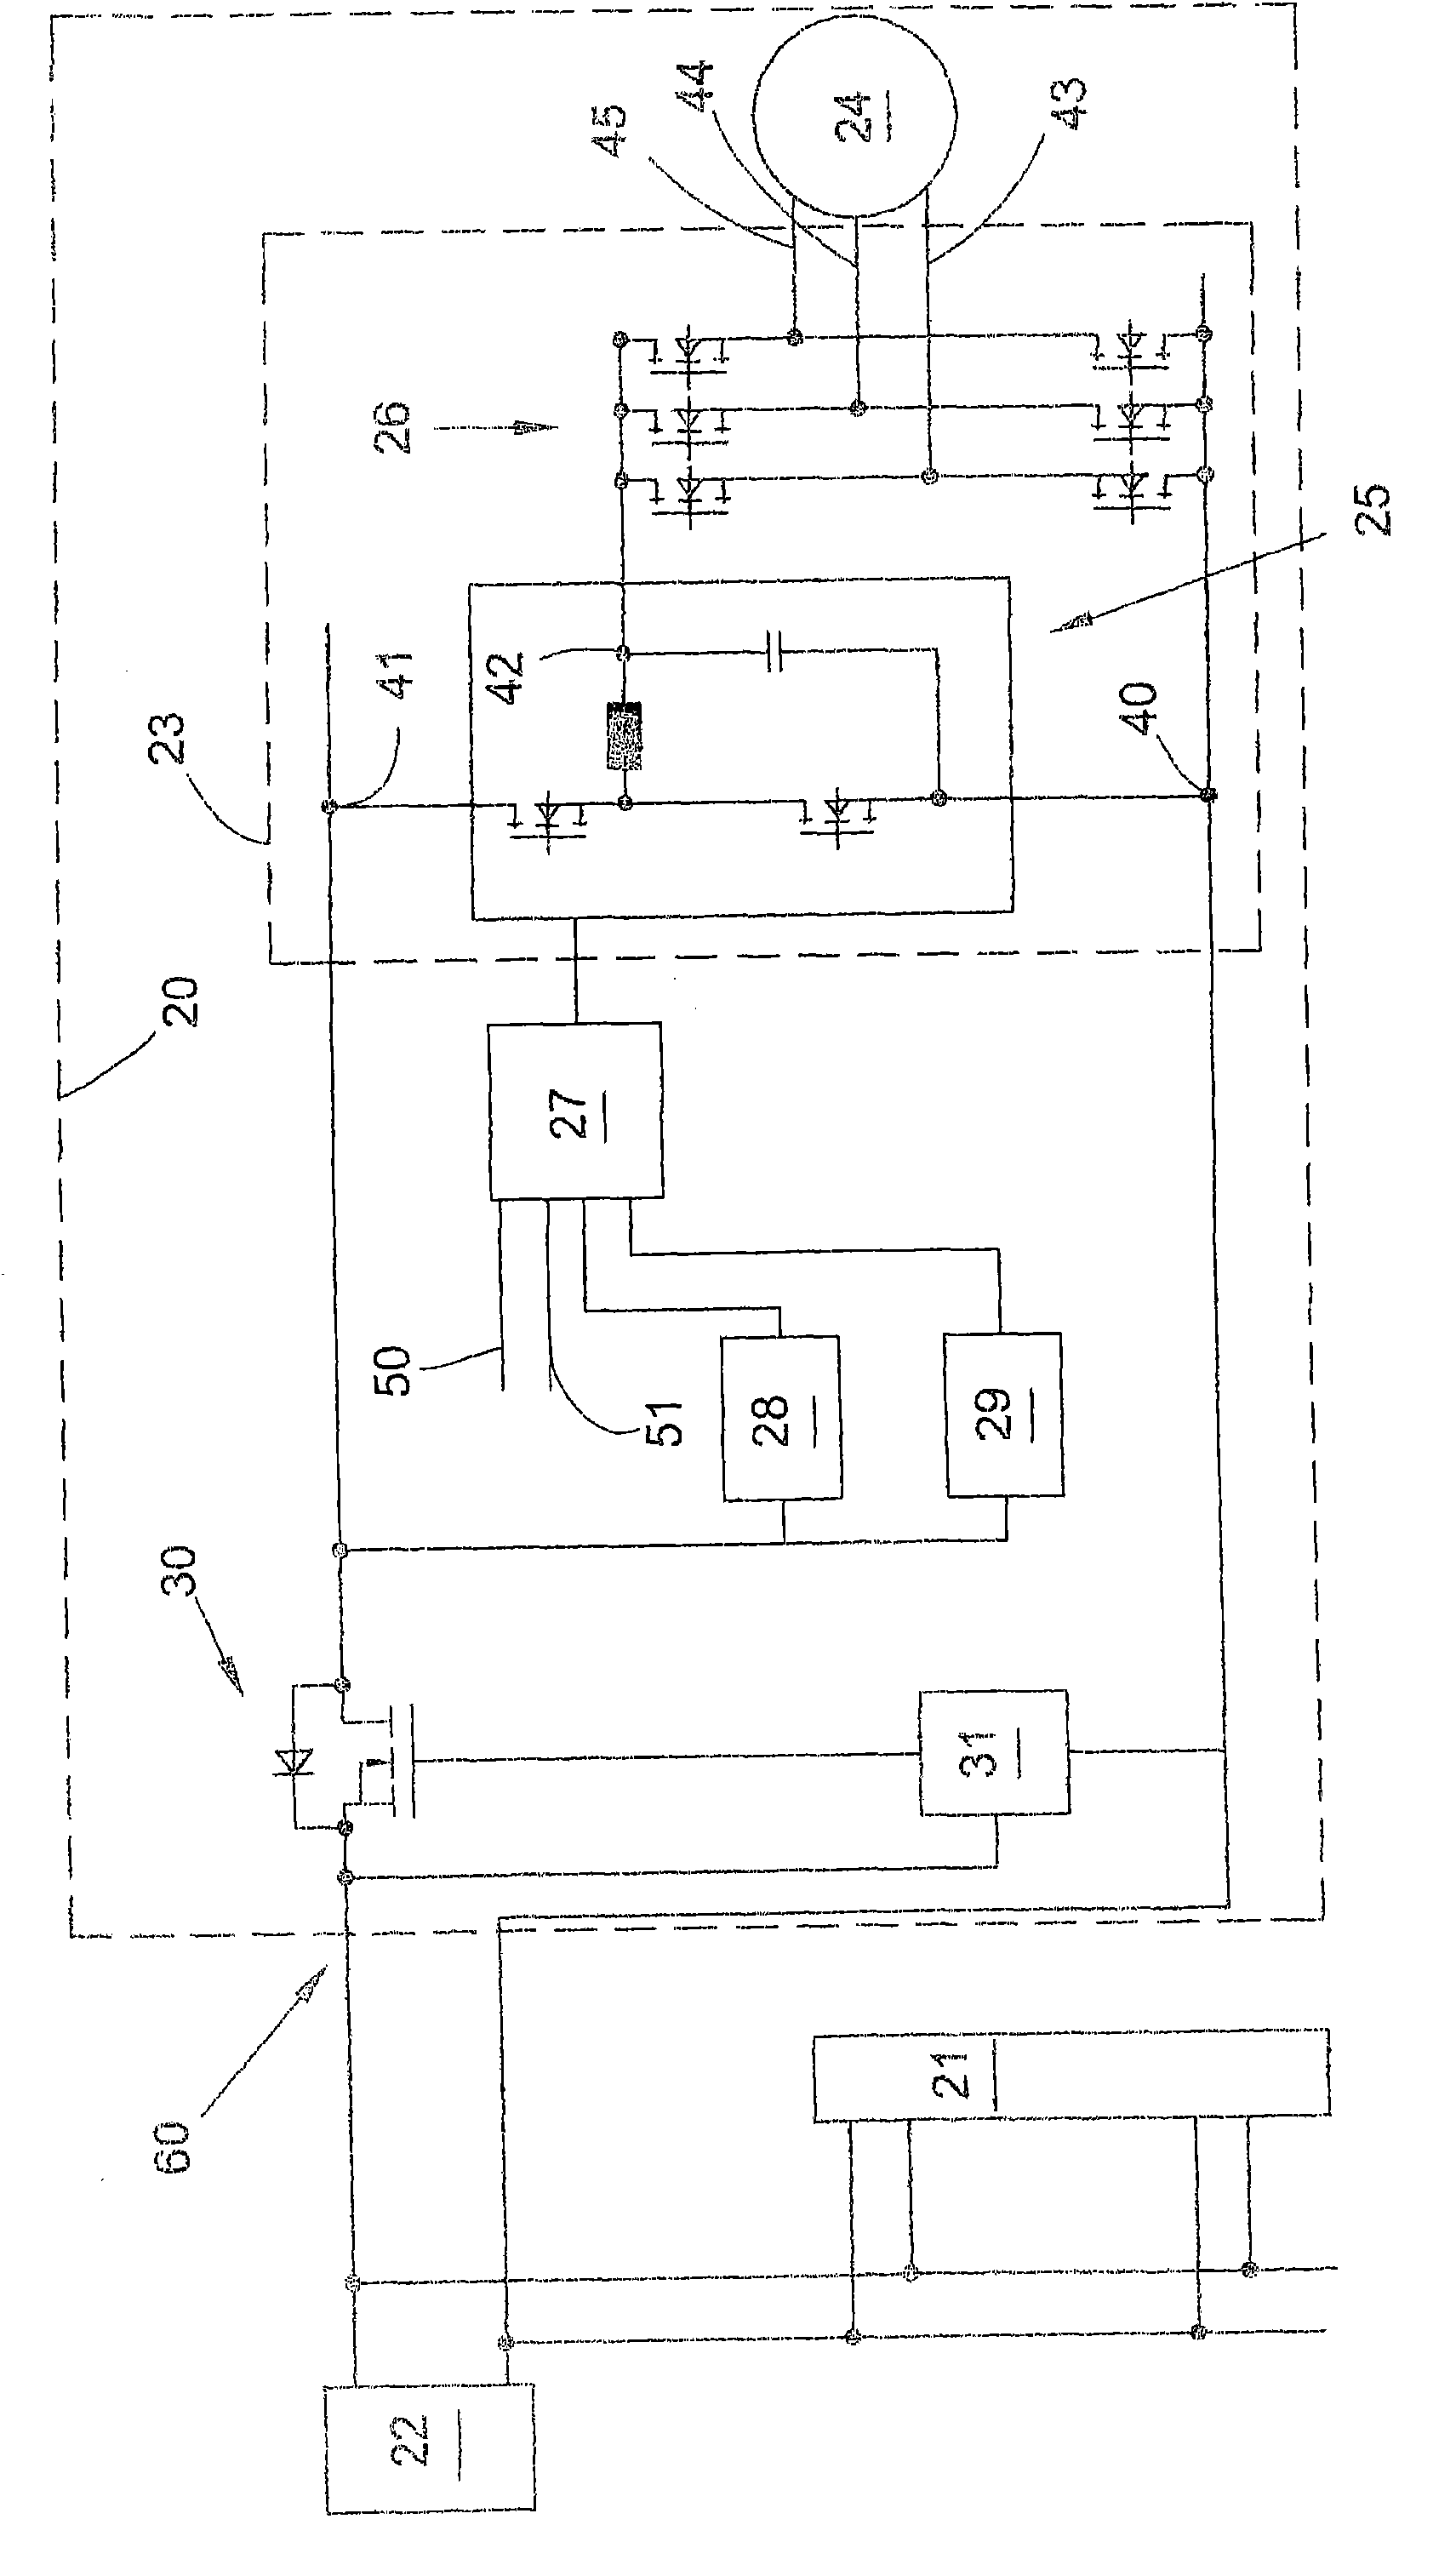 Workstation of open ended rotor spinning machine and method for operating workstation